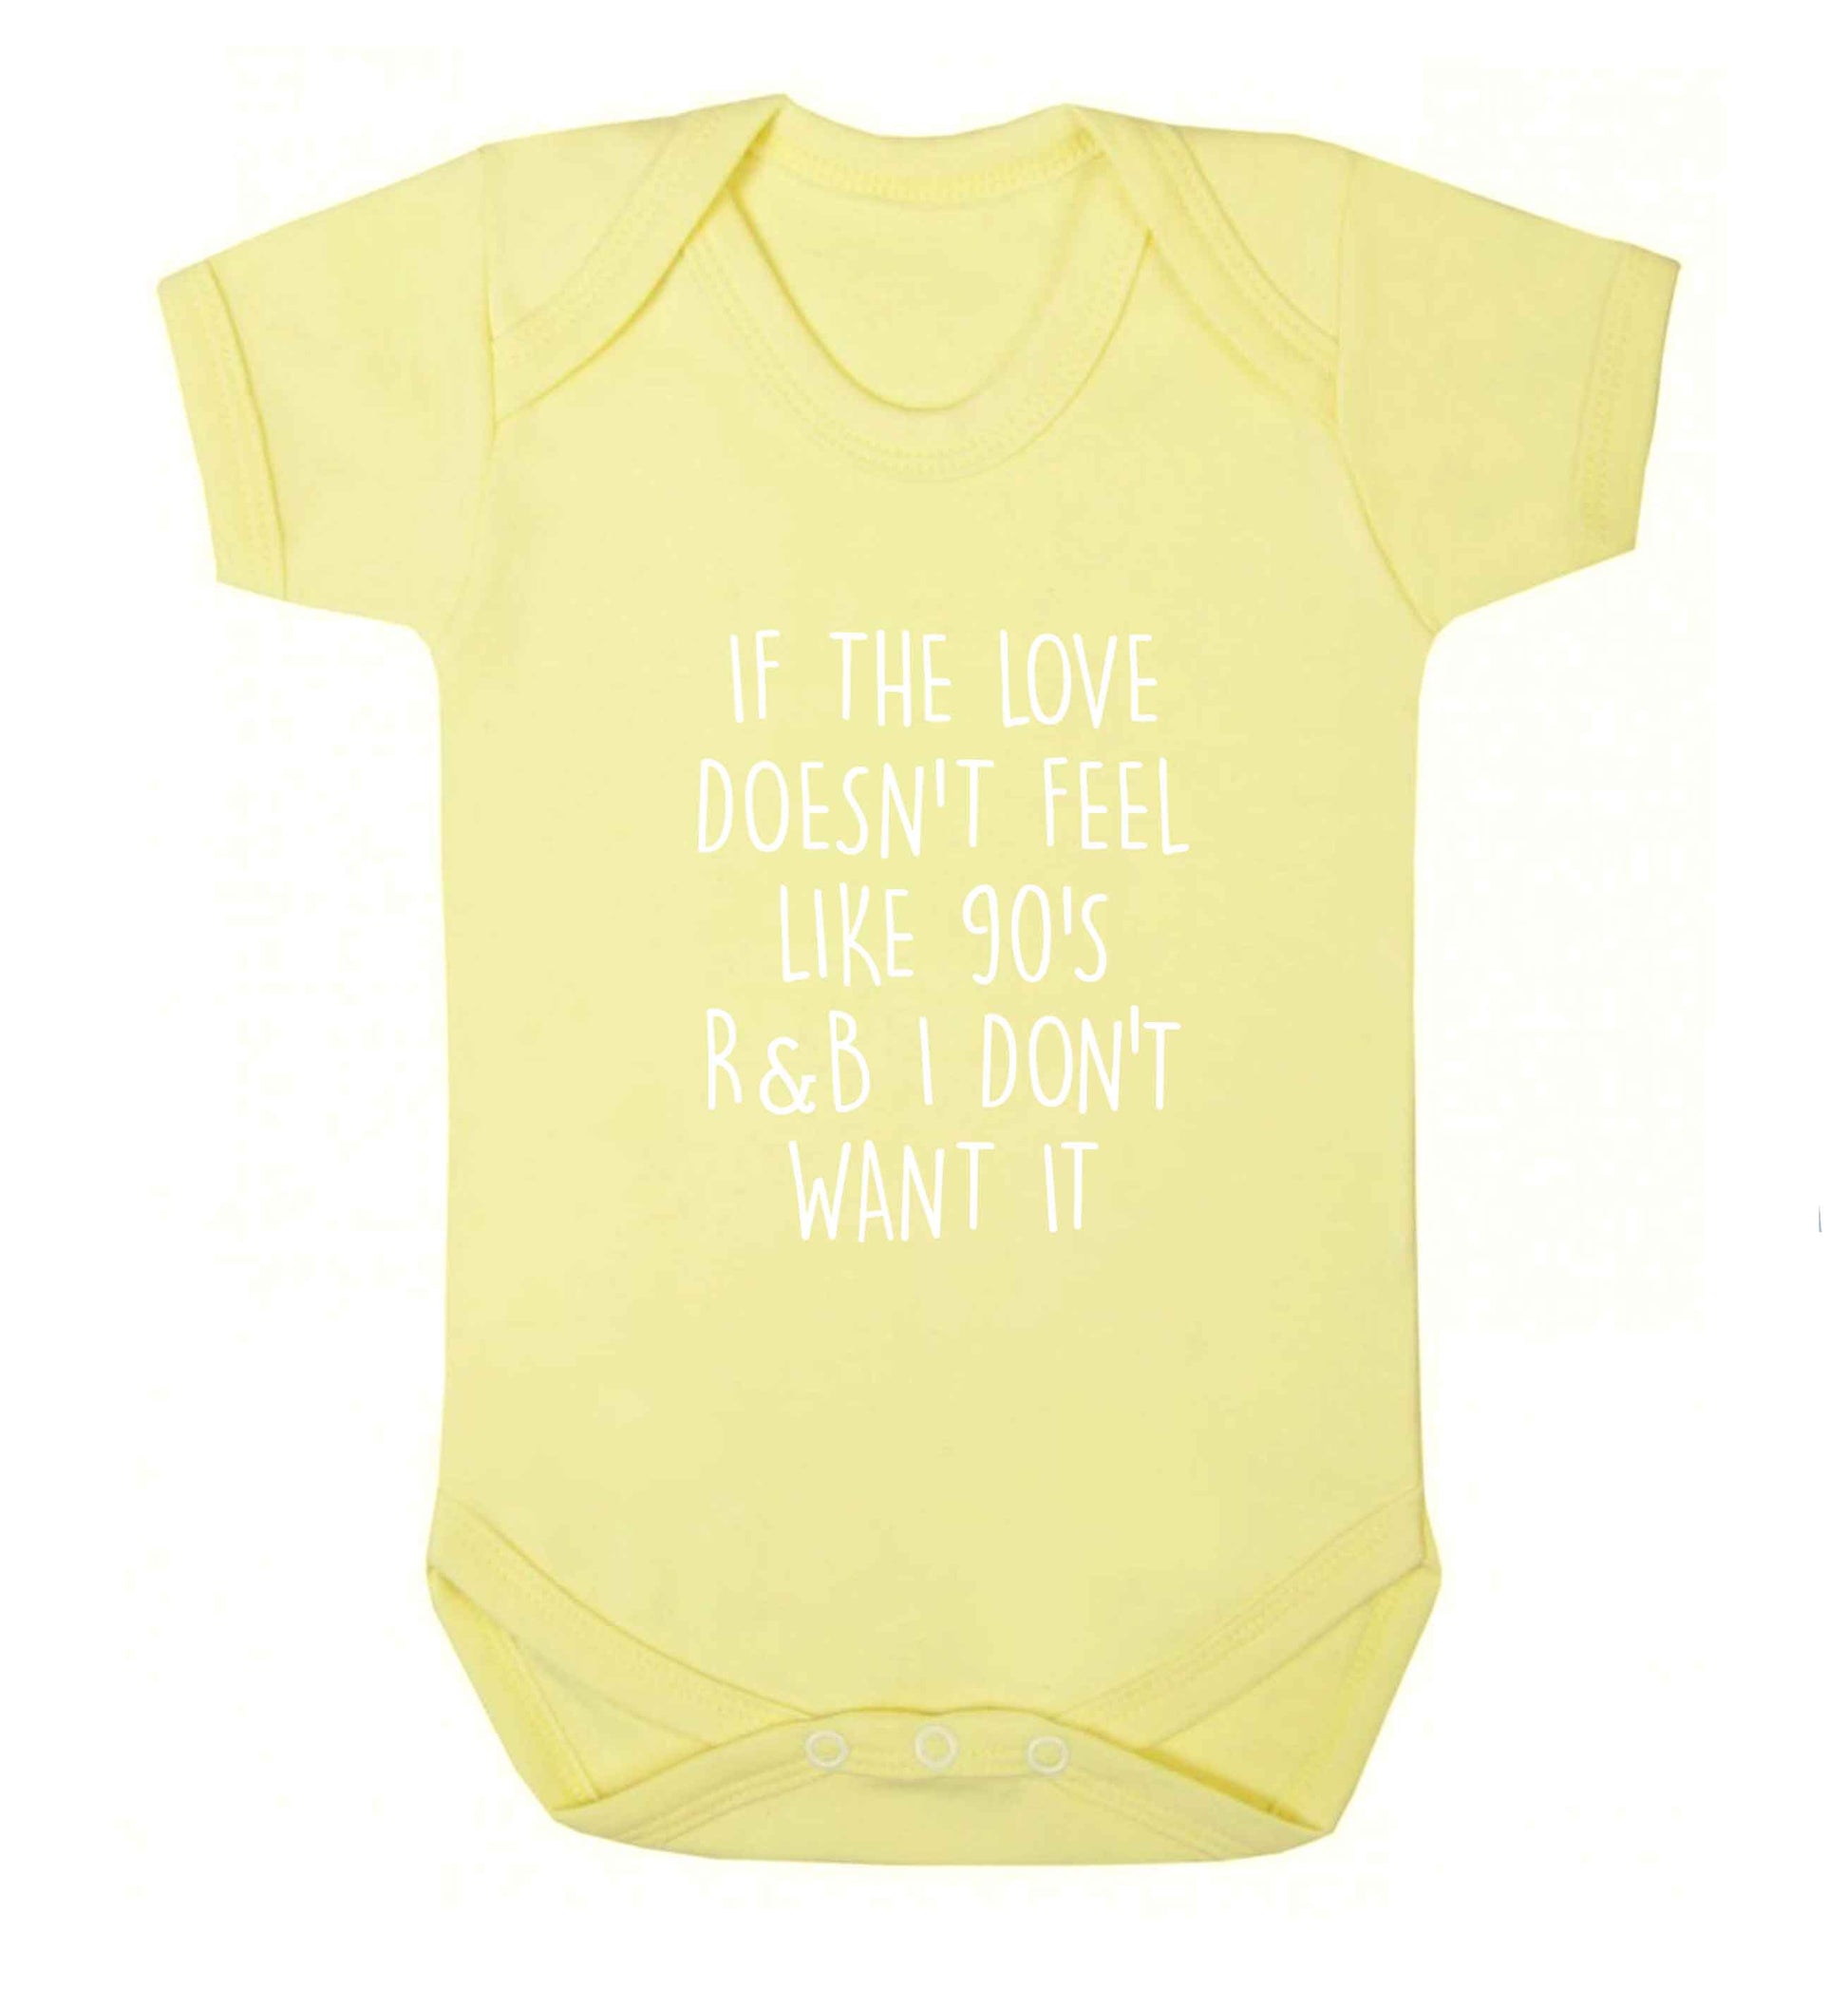 If the love doesn't feel like 90's r&b I don't want it baby vest pale yellow 18-24 months